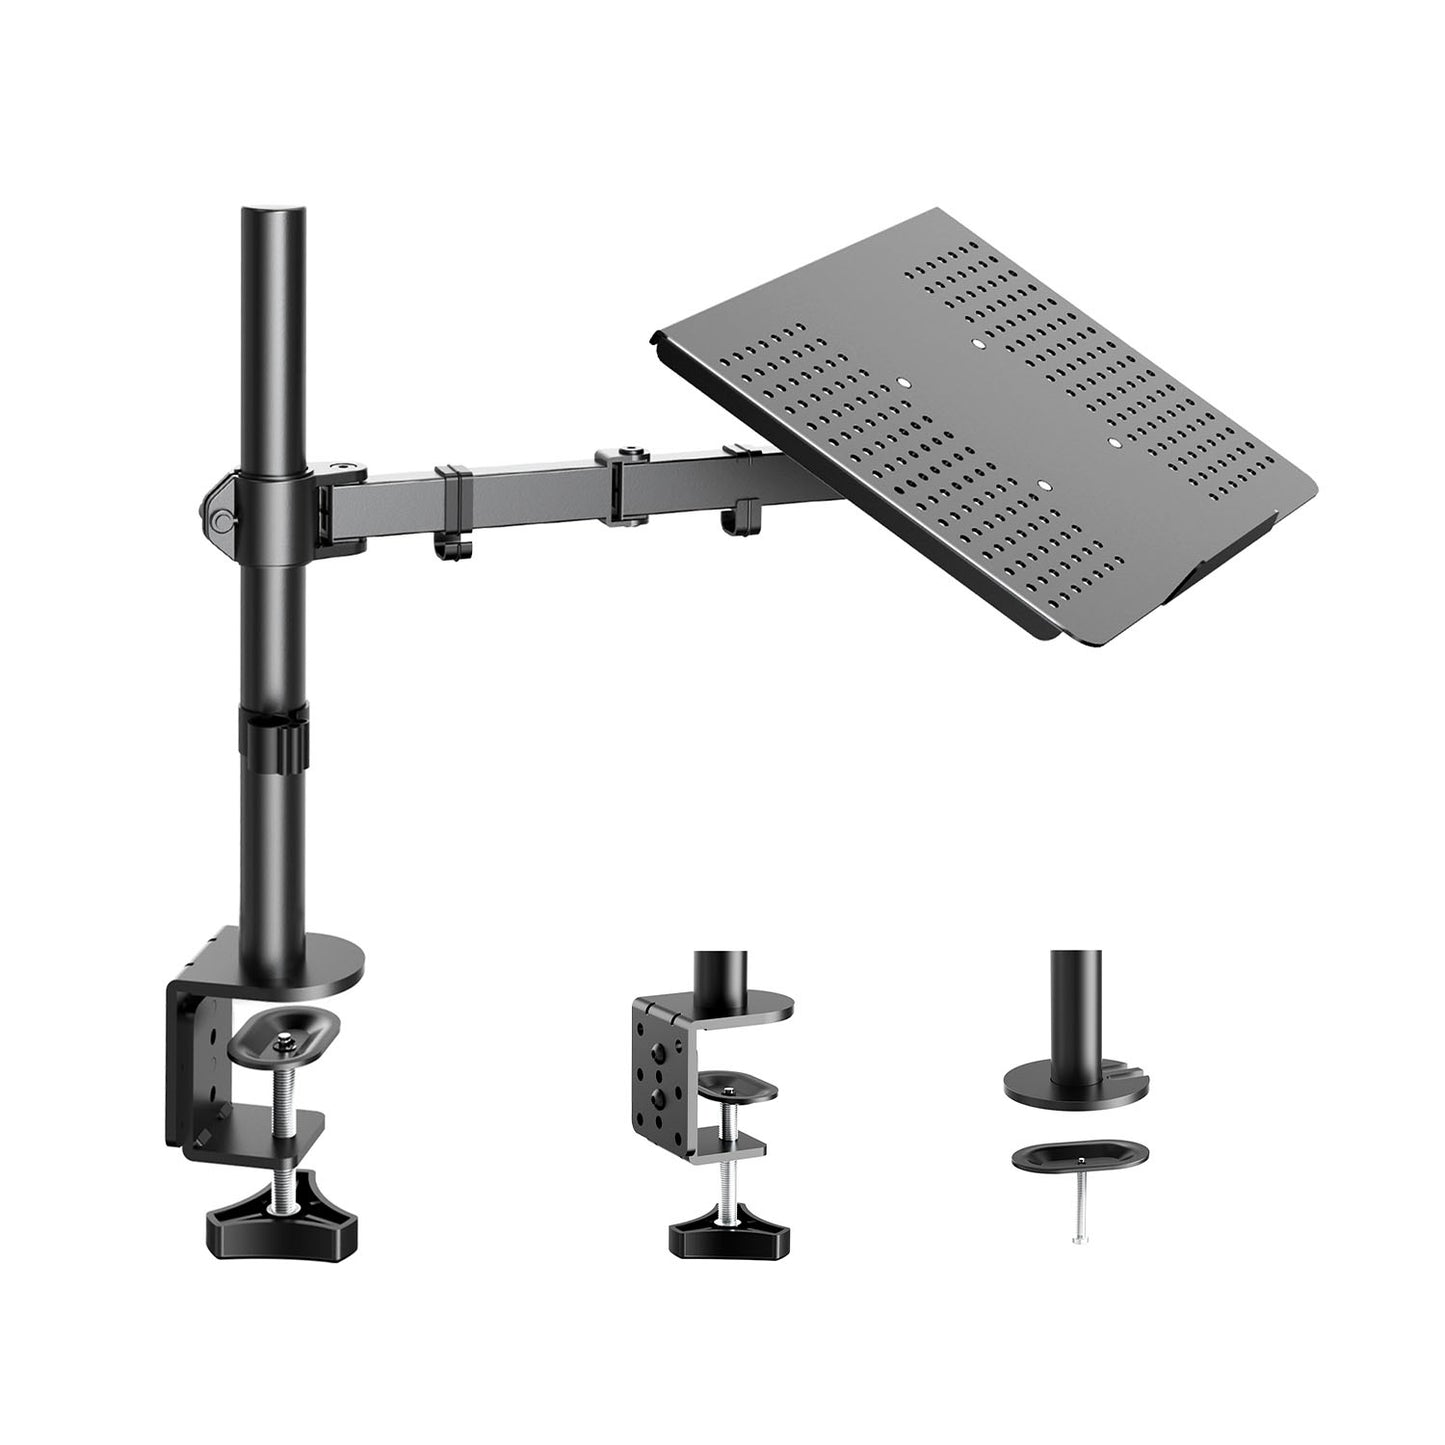 Single Laptop Mount For Laptops Up To 17"